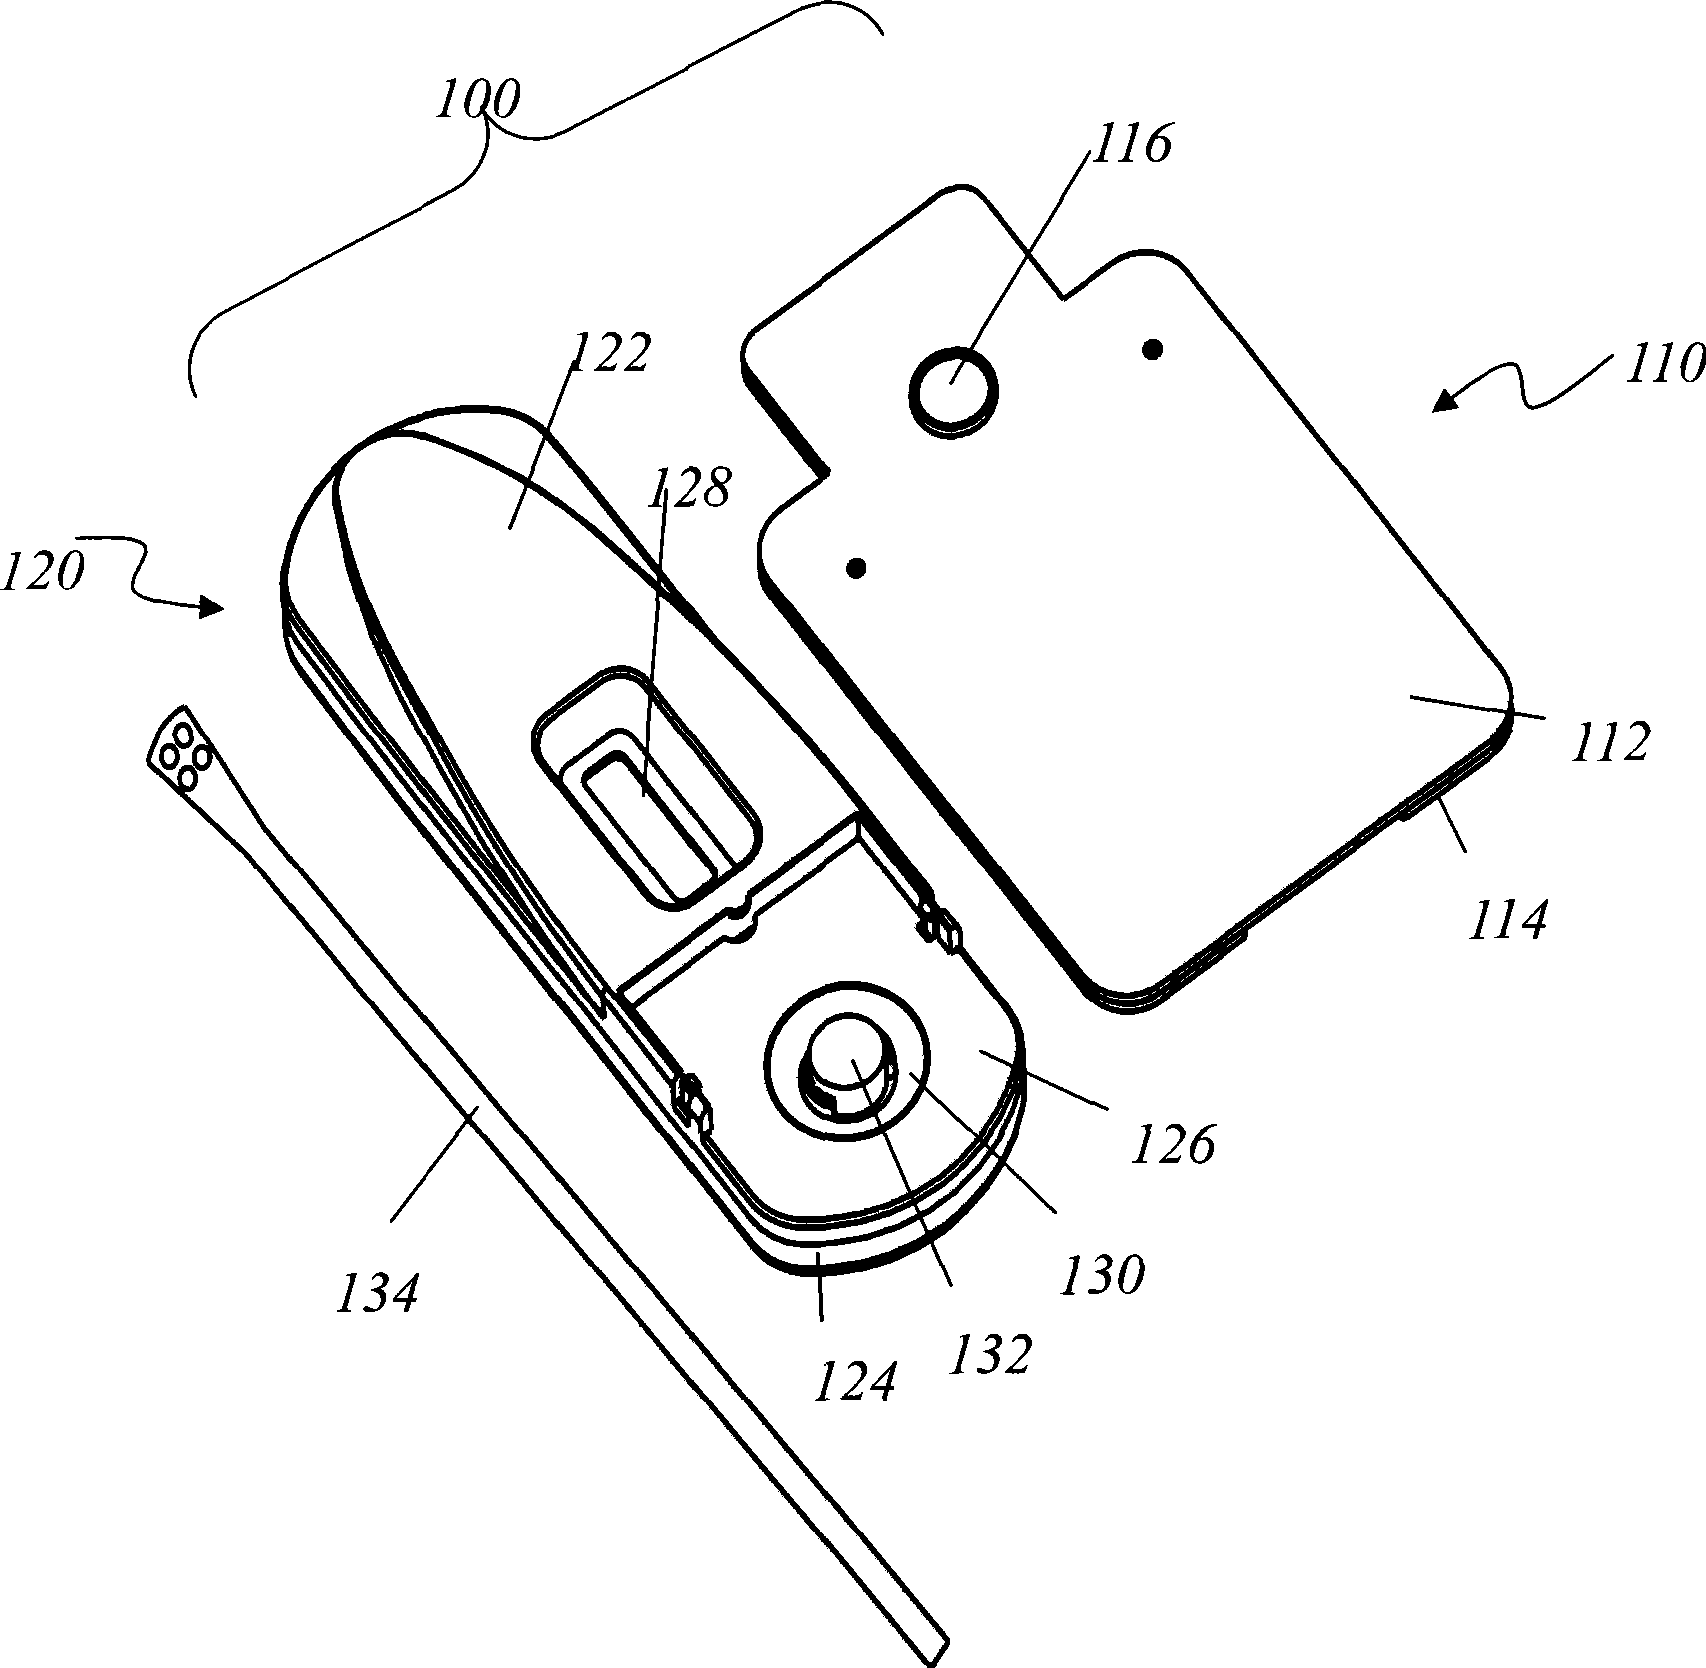 Sample collecting device used for collecting solid or semi-solid sample